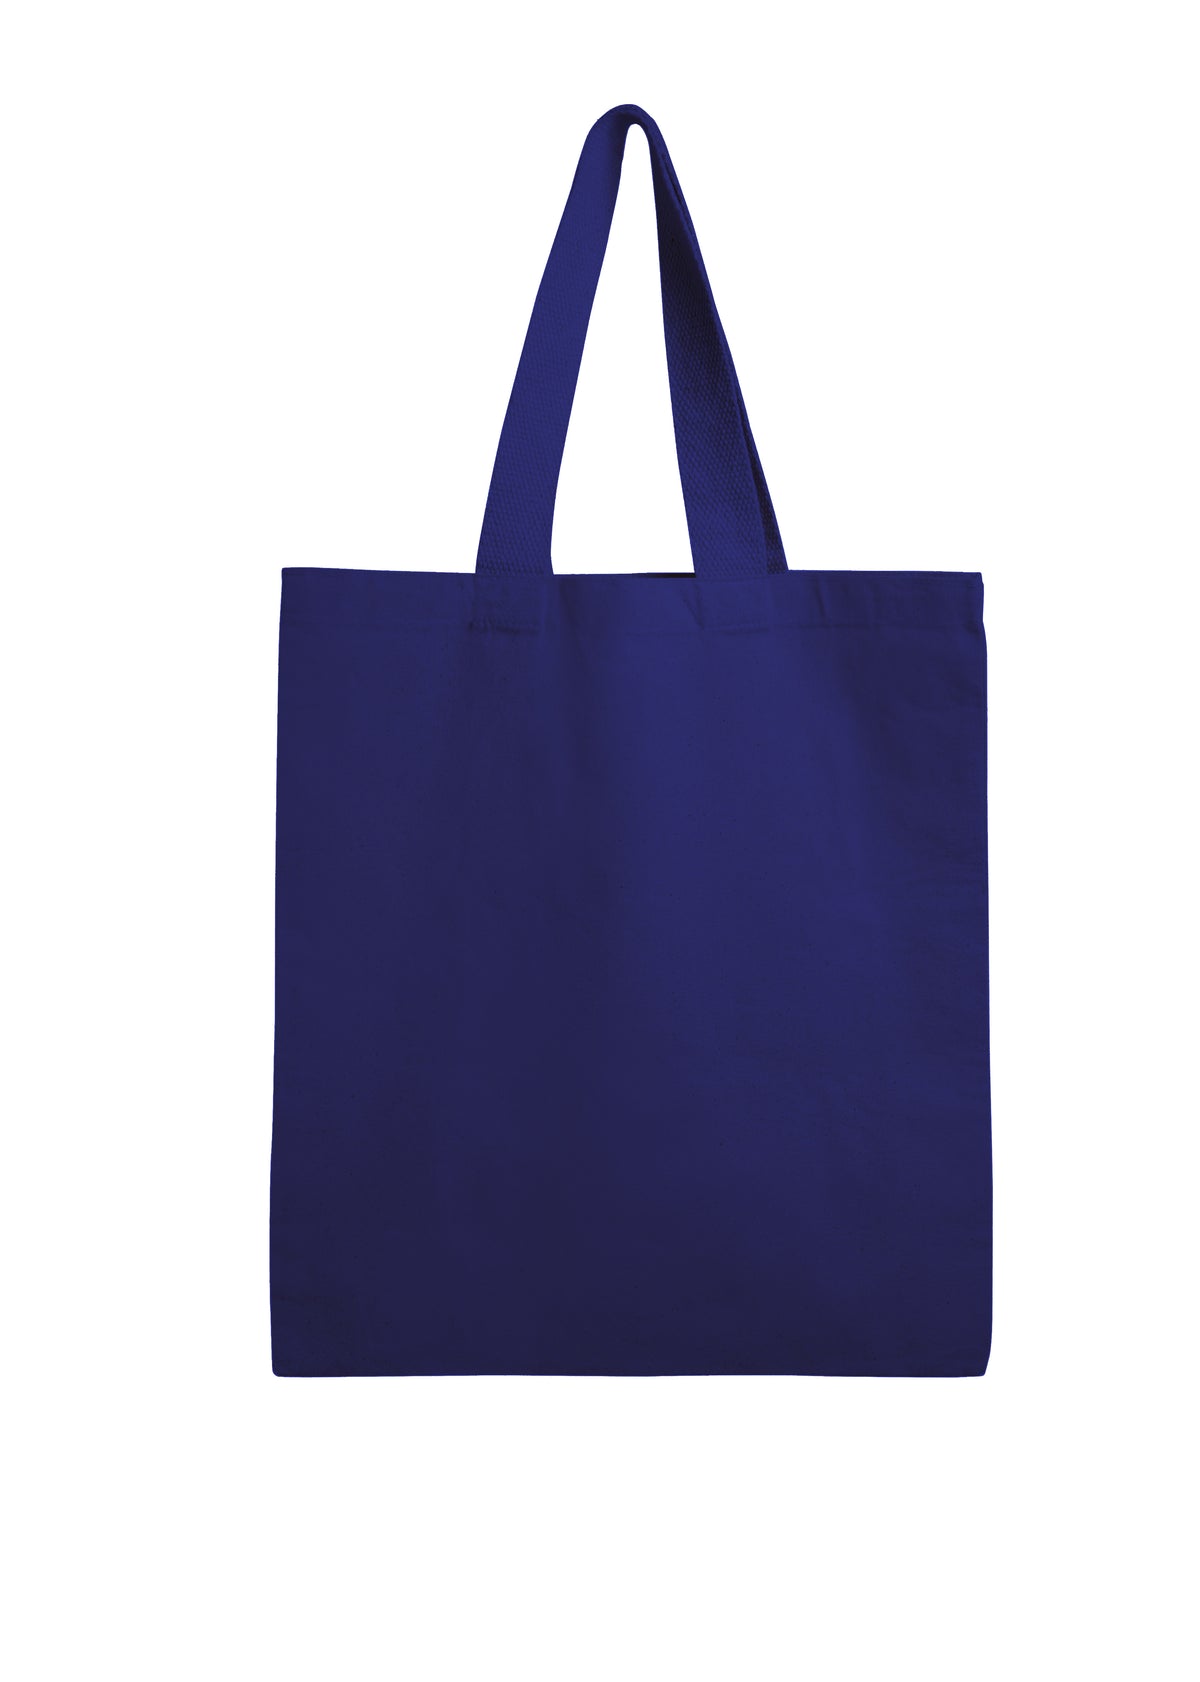 Linen Shopping Bags for Sublimation, sublimation Tote Bags, 100% polyester.  sublimation tote bag with pocket, tote bags for sublimation